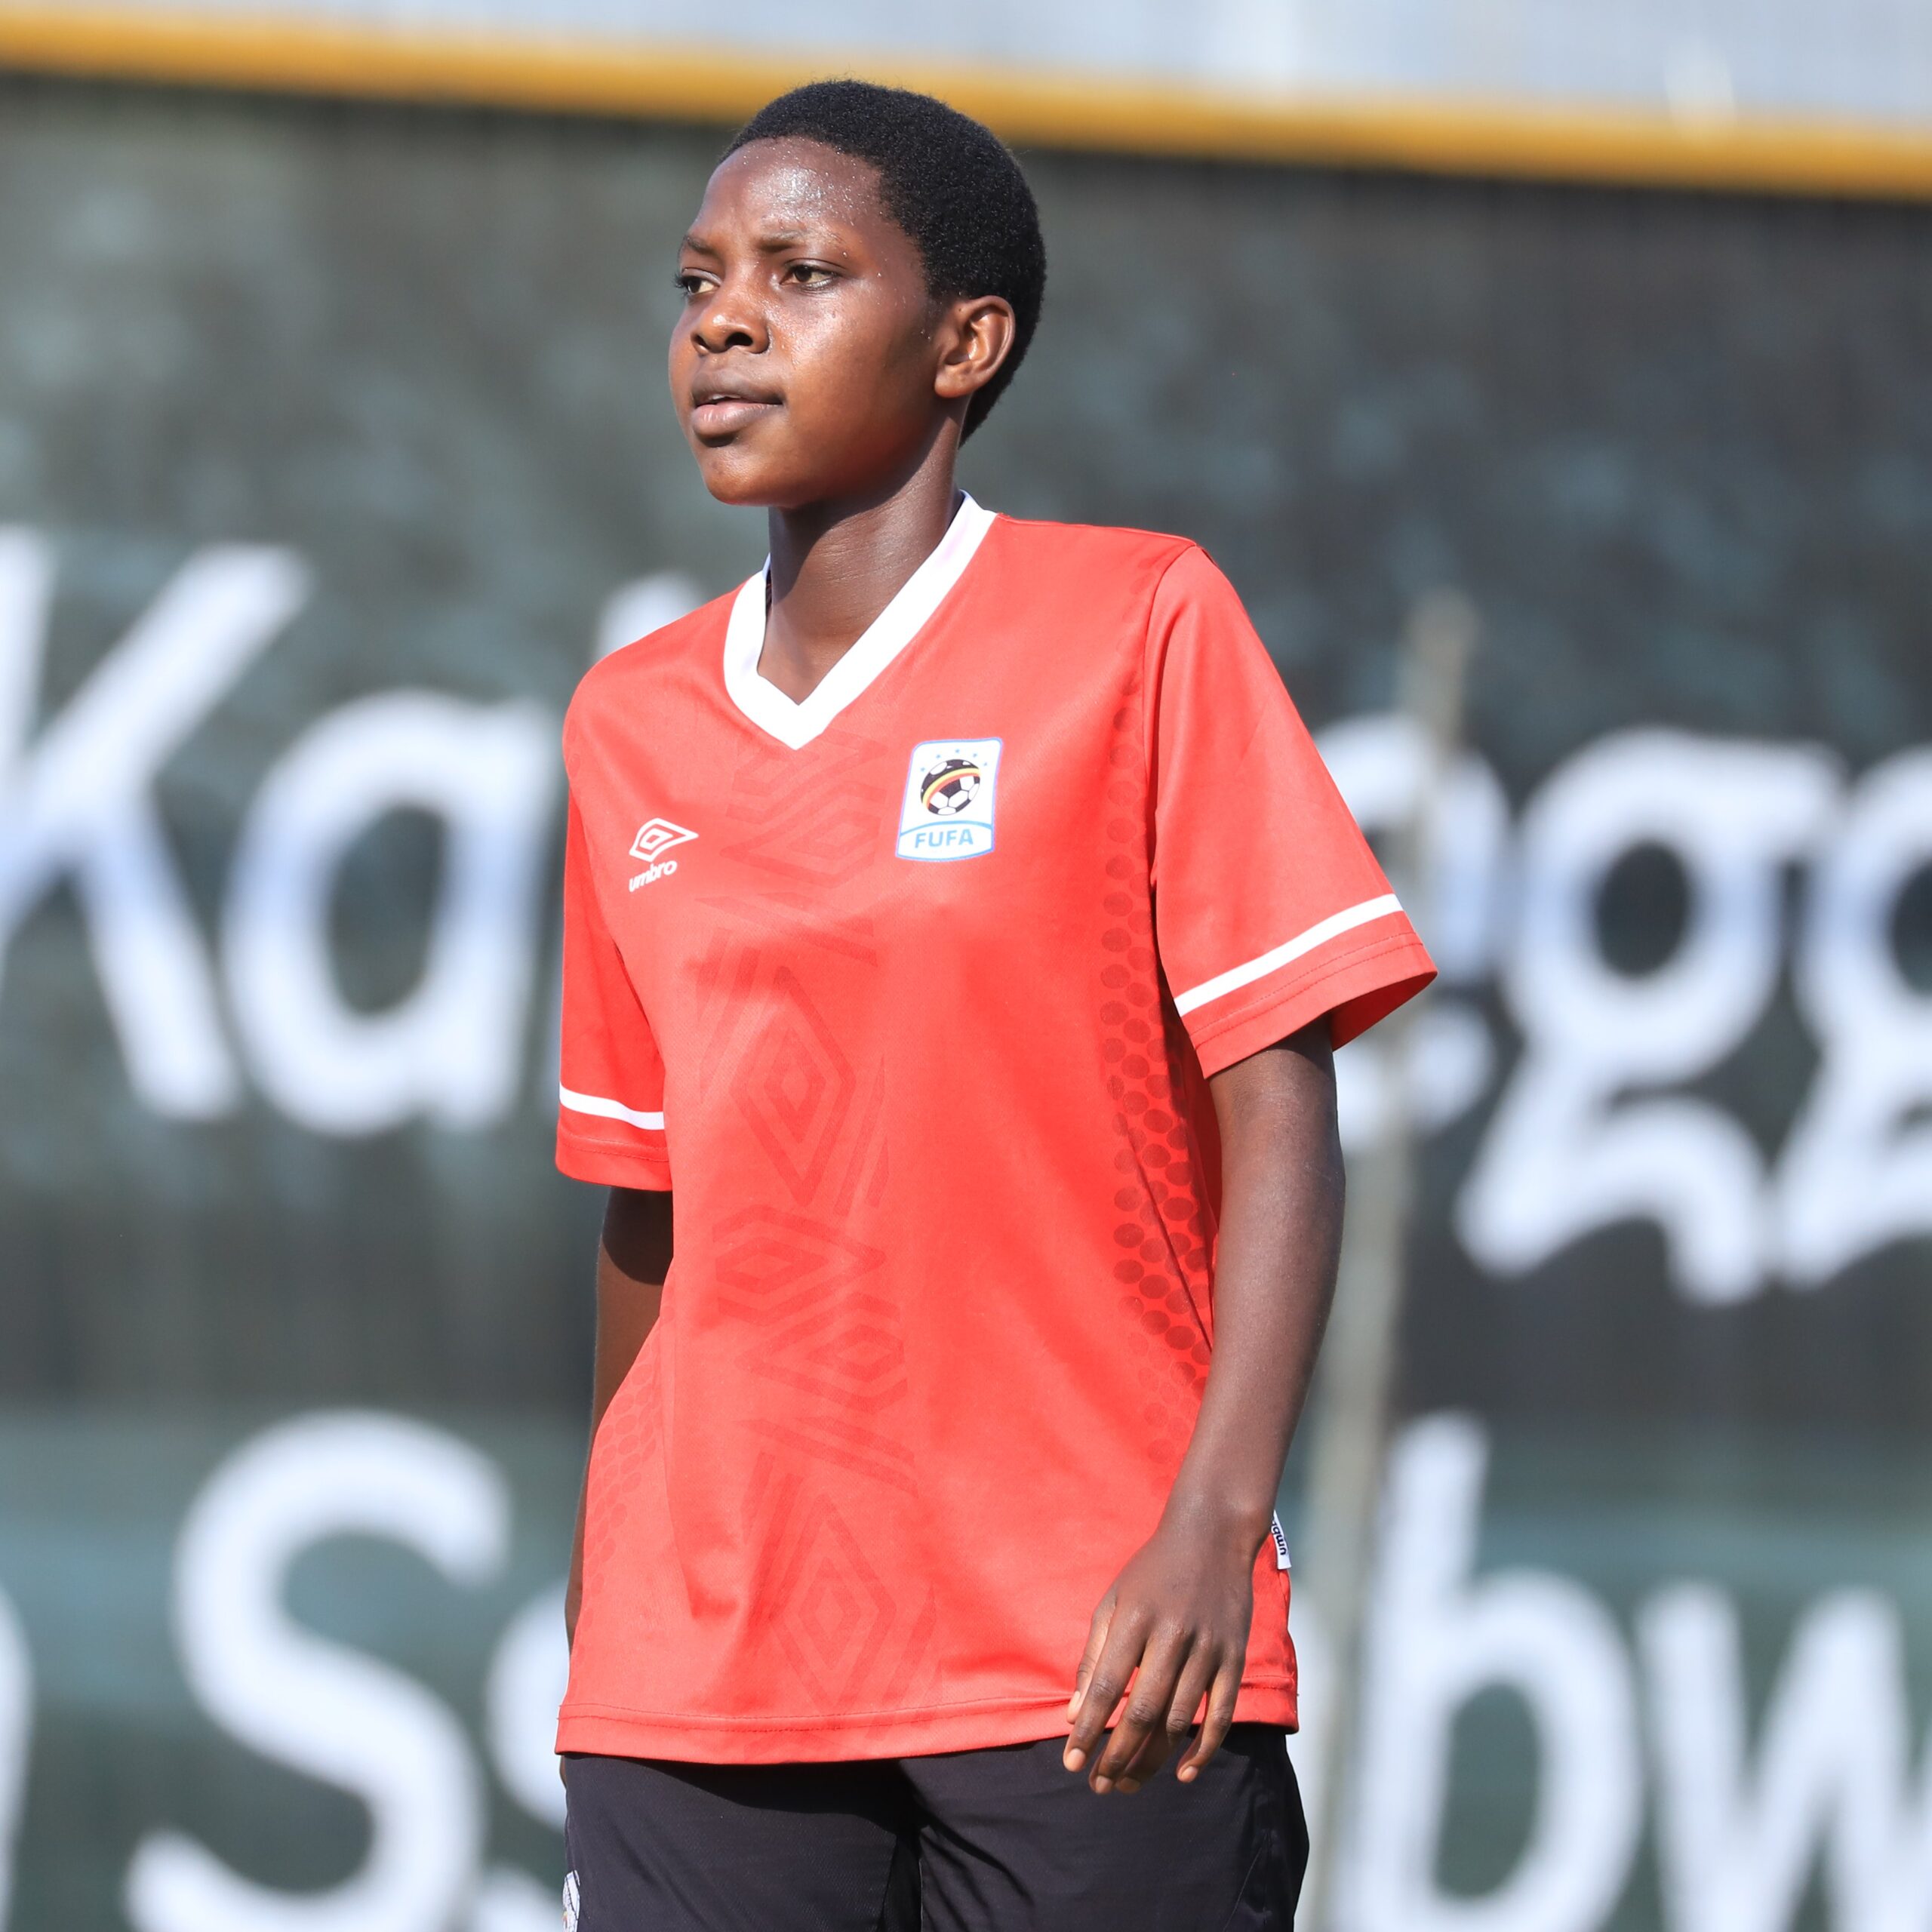 Nabulime: Our target for CECAFA U-18 Women’s tourney remains the same despite disruptions